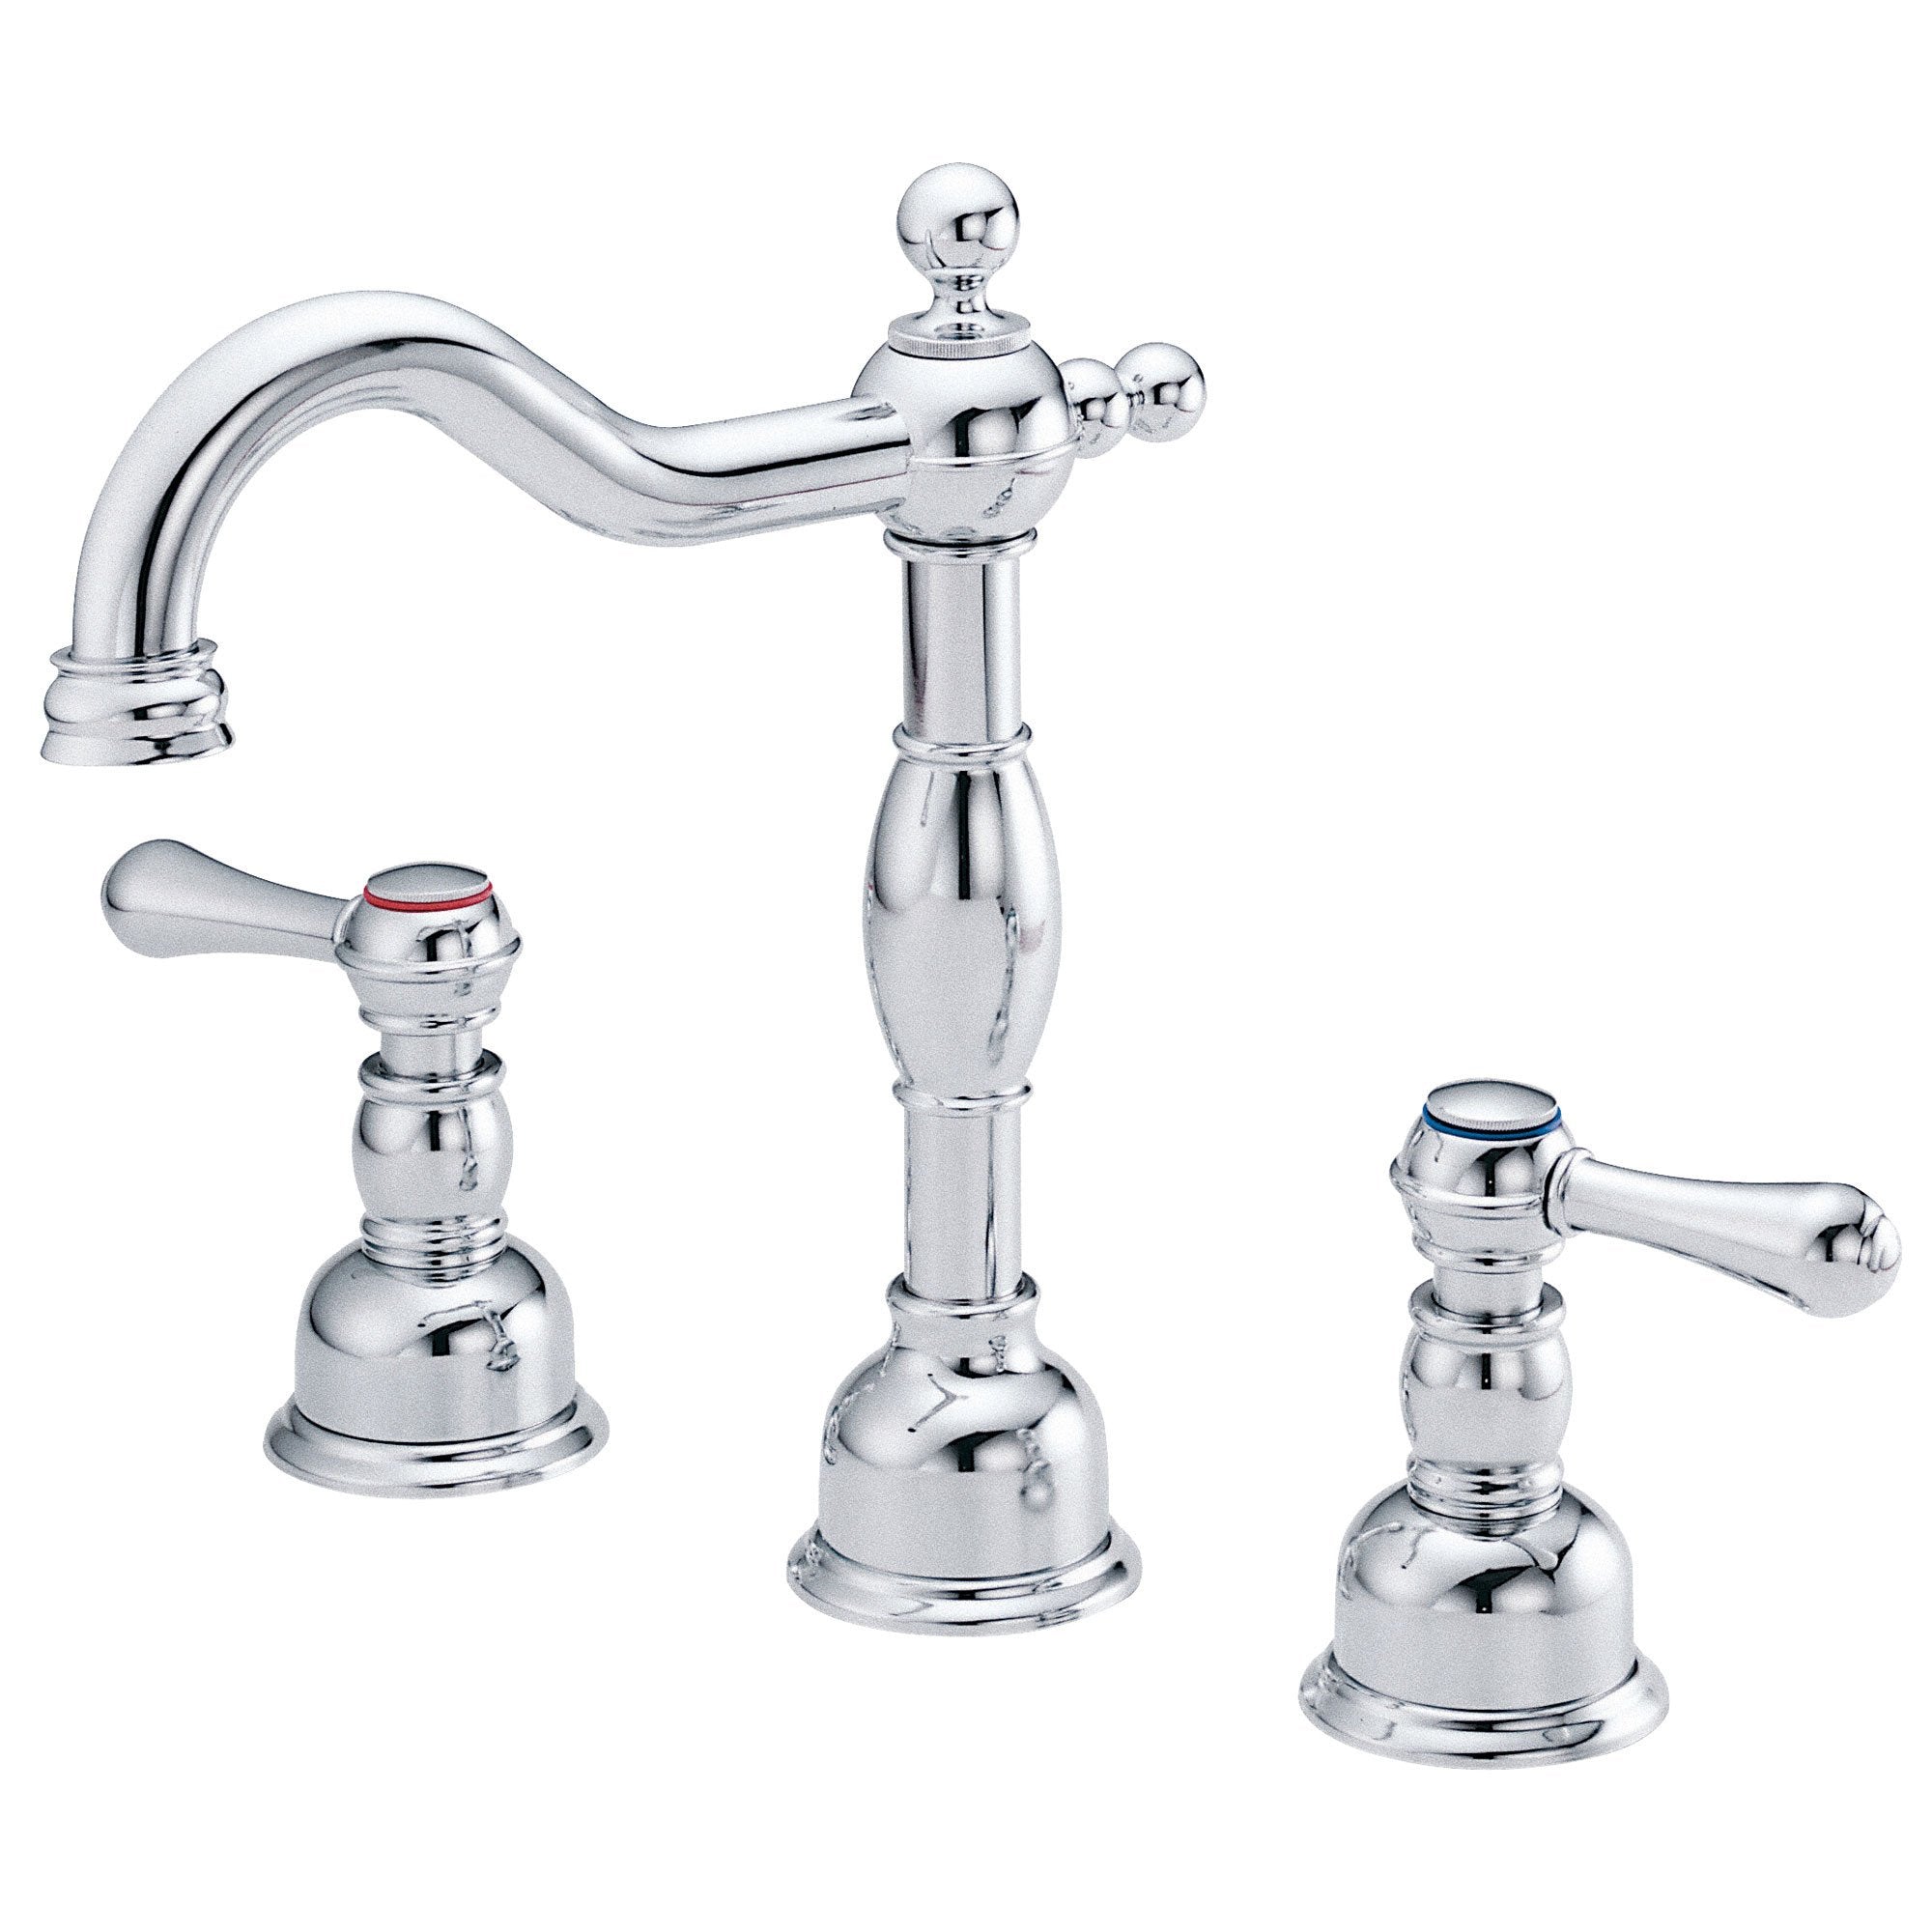 Danze Opulence Chrome Traditional Widespread Roman Tub Filler Faucet INCLUDES Rough-in Valve